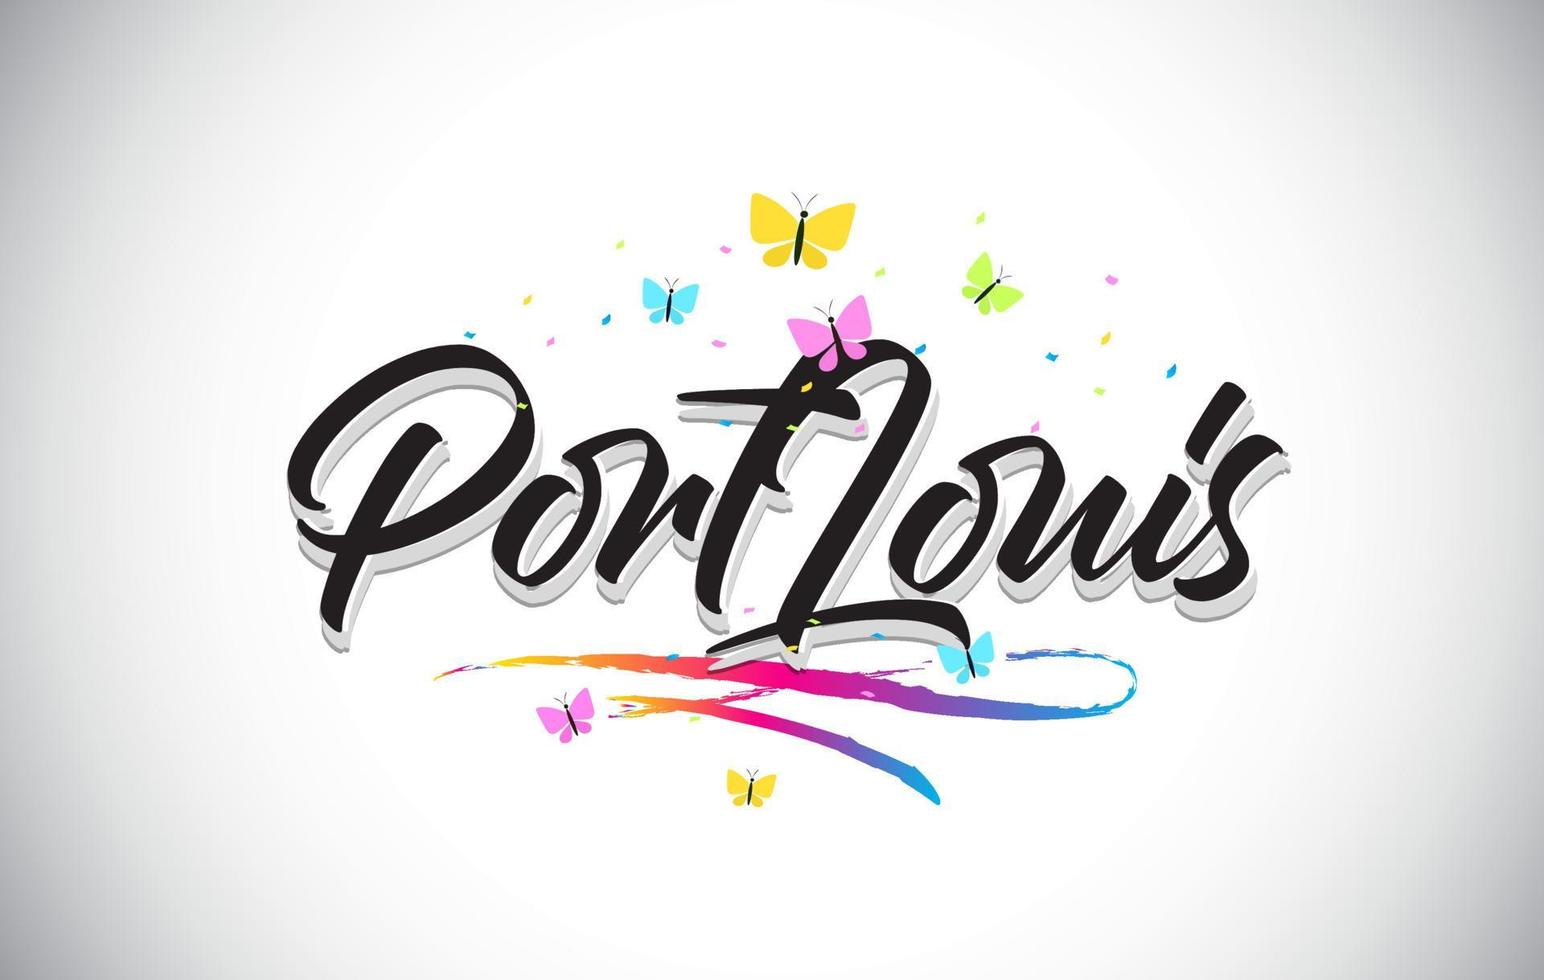 PortLouis Handwritten Vector Word Text with Butterflies and Colorful Swoosh.